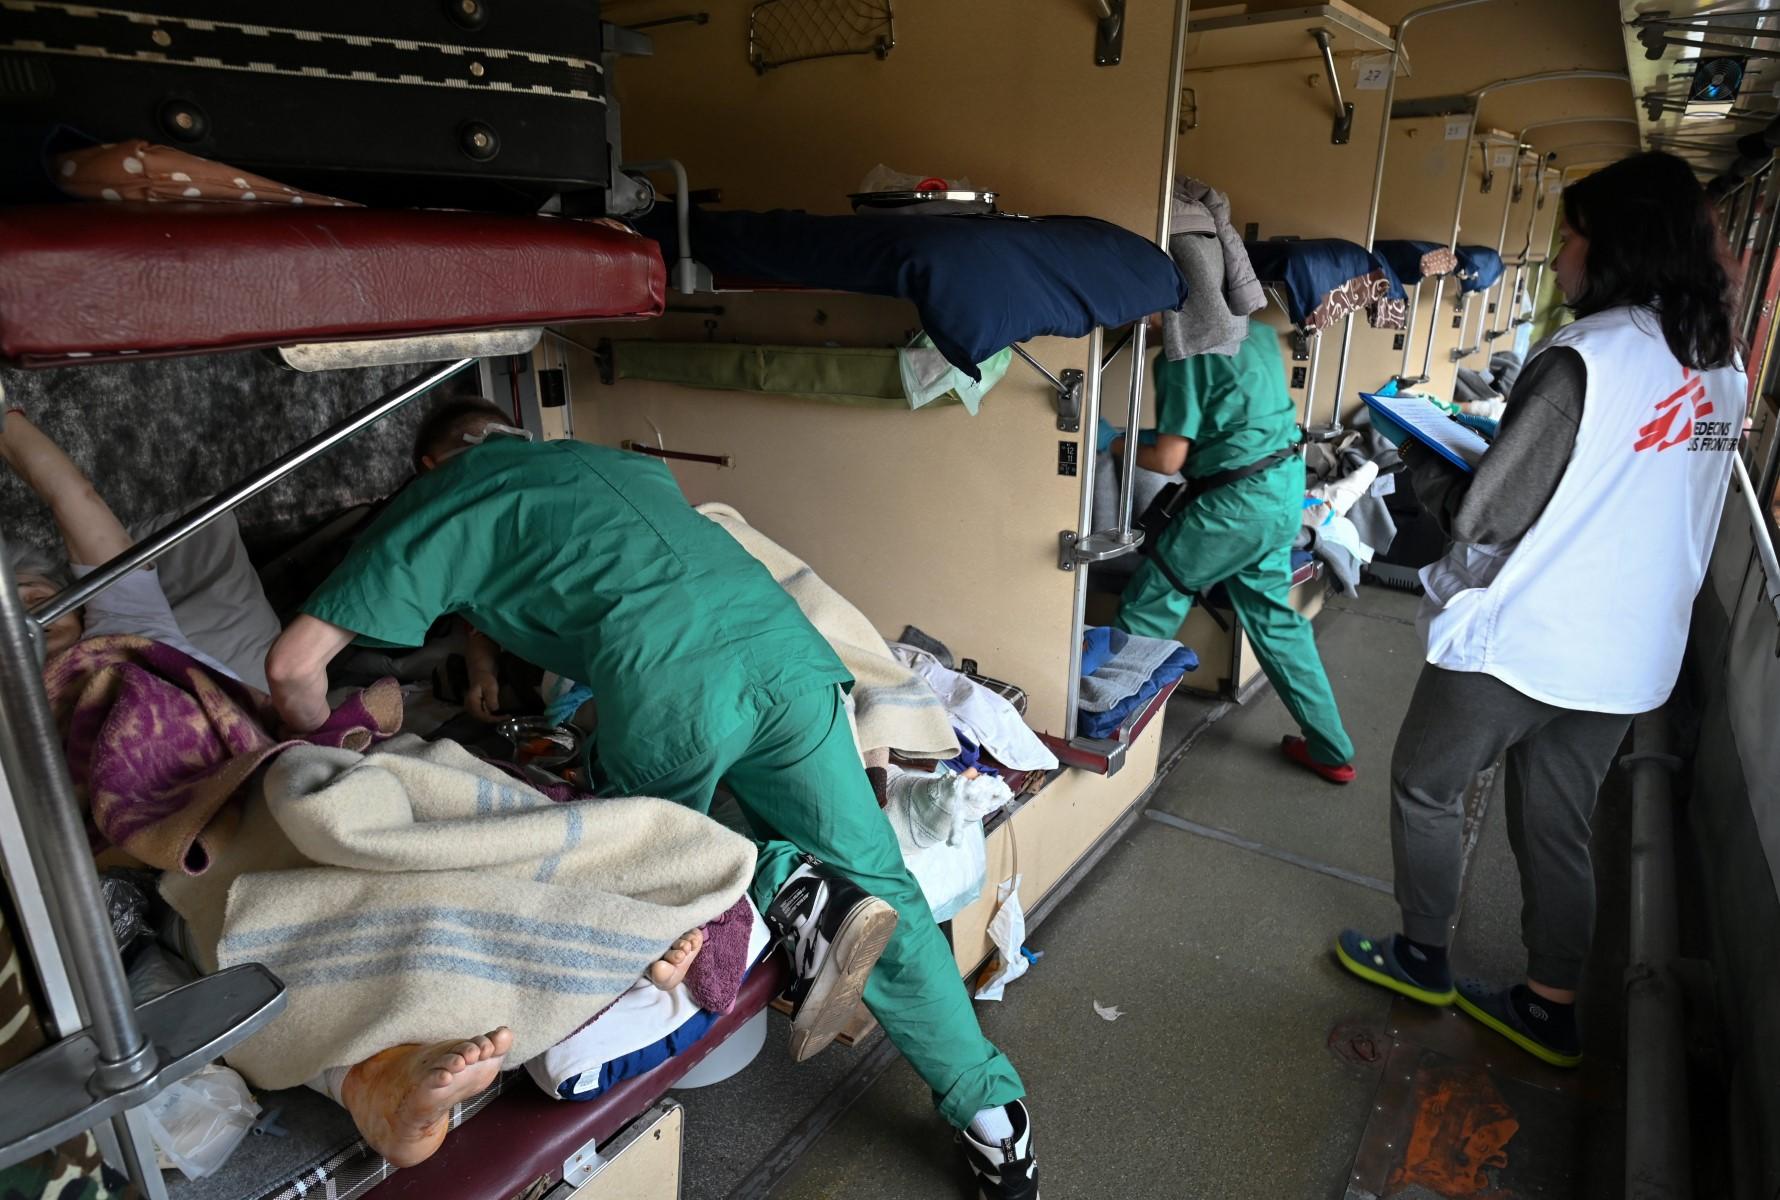 A Doctors Without Borders team care for patients on a medical evacuation train on its way to the western Ukrainian city of Lviv on April 10. Photo: AFP